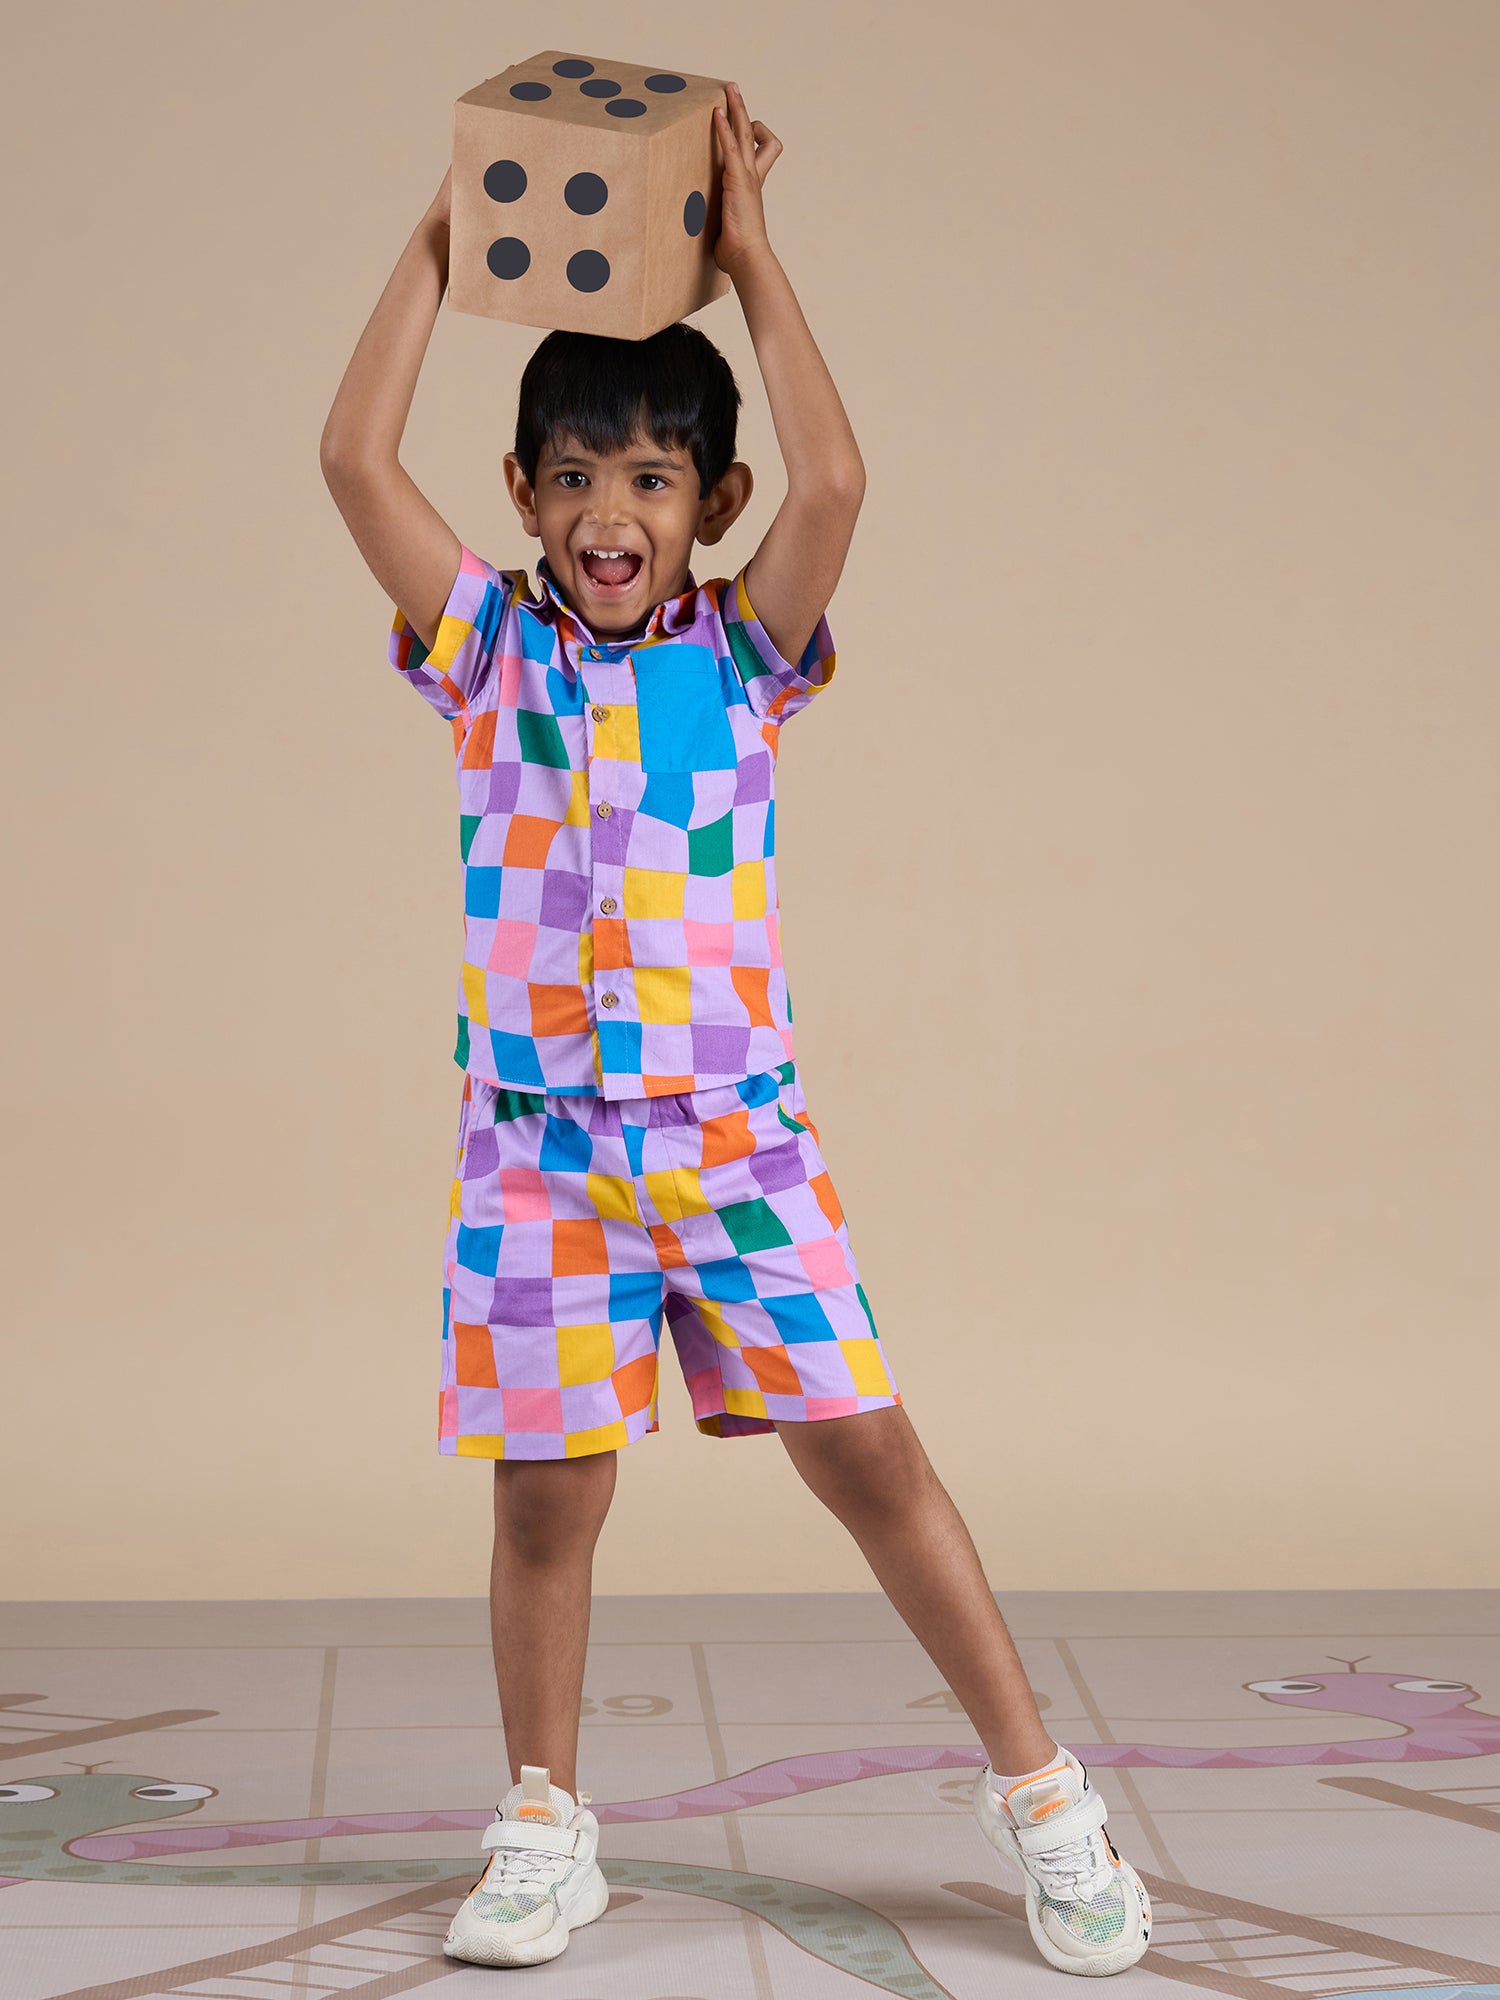 Snakes And Ladders Boys Multi Color Rotary Print Shirt And Boxer Set From Siblings Collection - Lil Drama